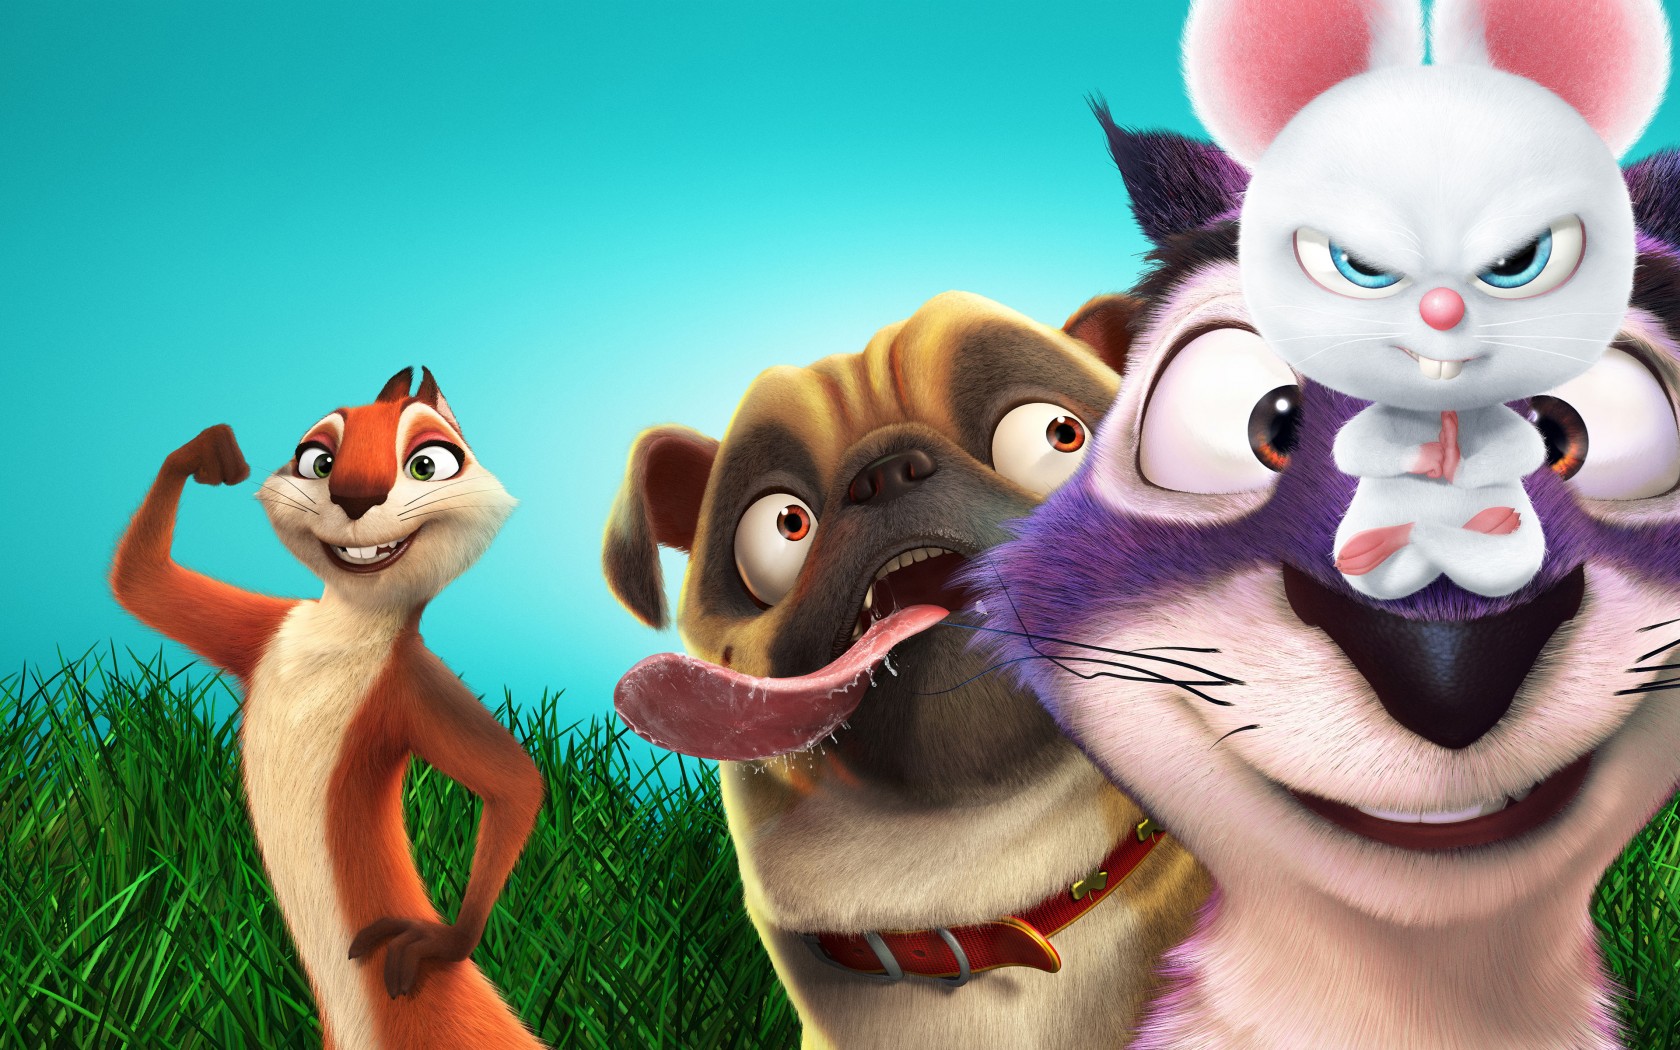 The Nut Job 2 Nutty By Nature 4k Wallpapers Hd Wallpapers - Nut Job 2 Nutty By Nature - HD Wallpaper 